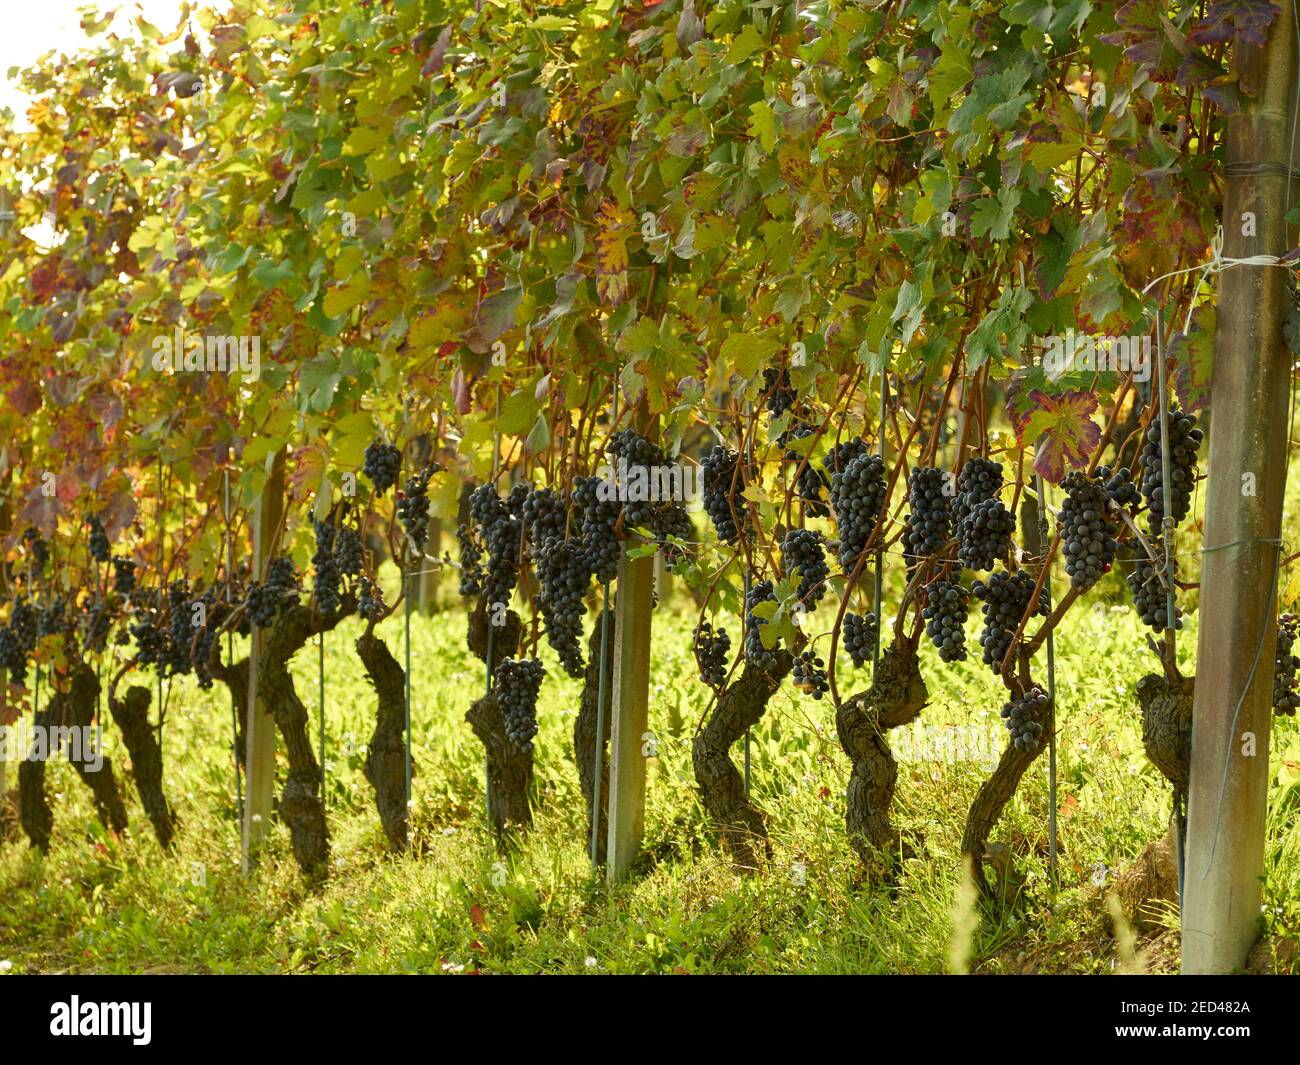 Nebbiolo grapes on the vine in Dogliani, Langhe, Italy Stock Photo